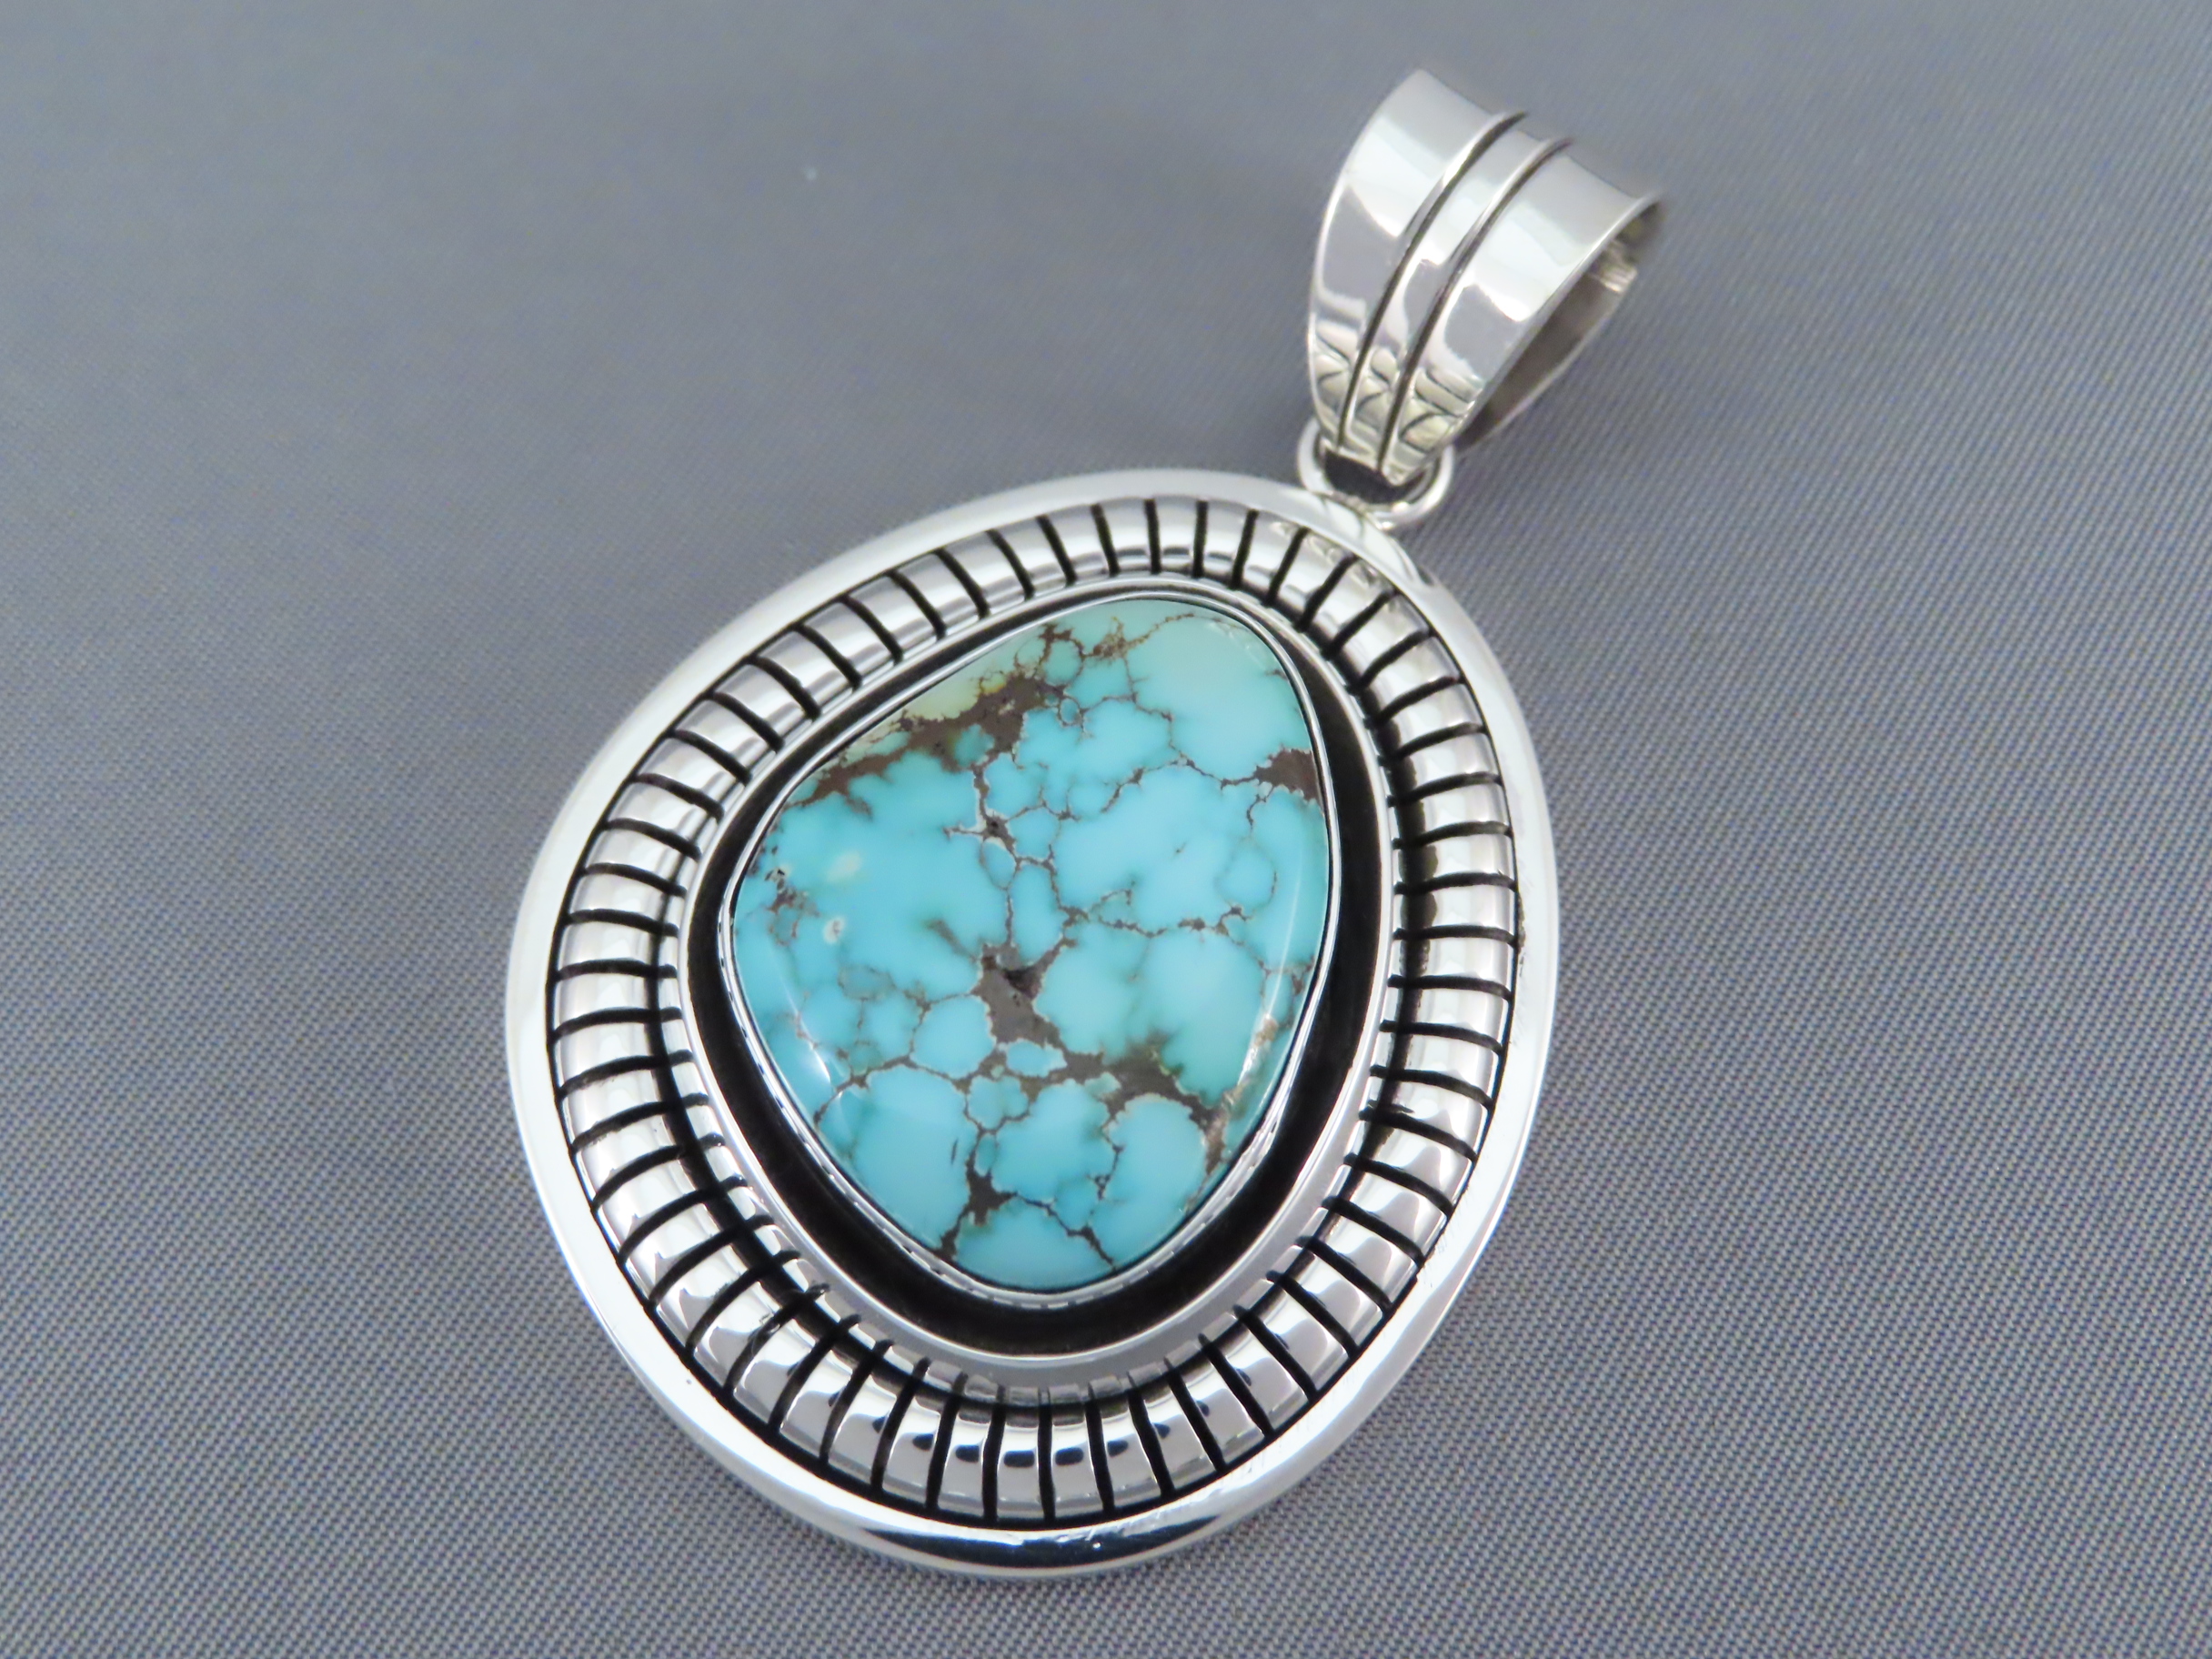 Navajo Jewelry - Turquoise Mountain Turquoise Pendant by Native American jeweler, Marian Nez FOR SALE $625-